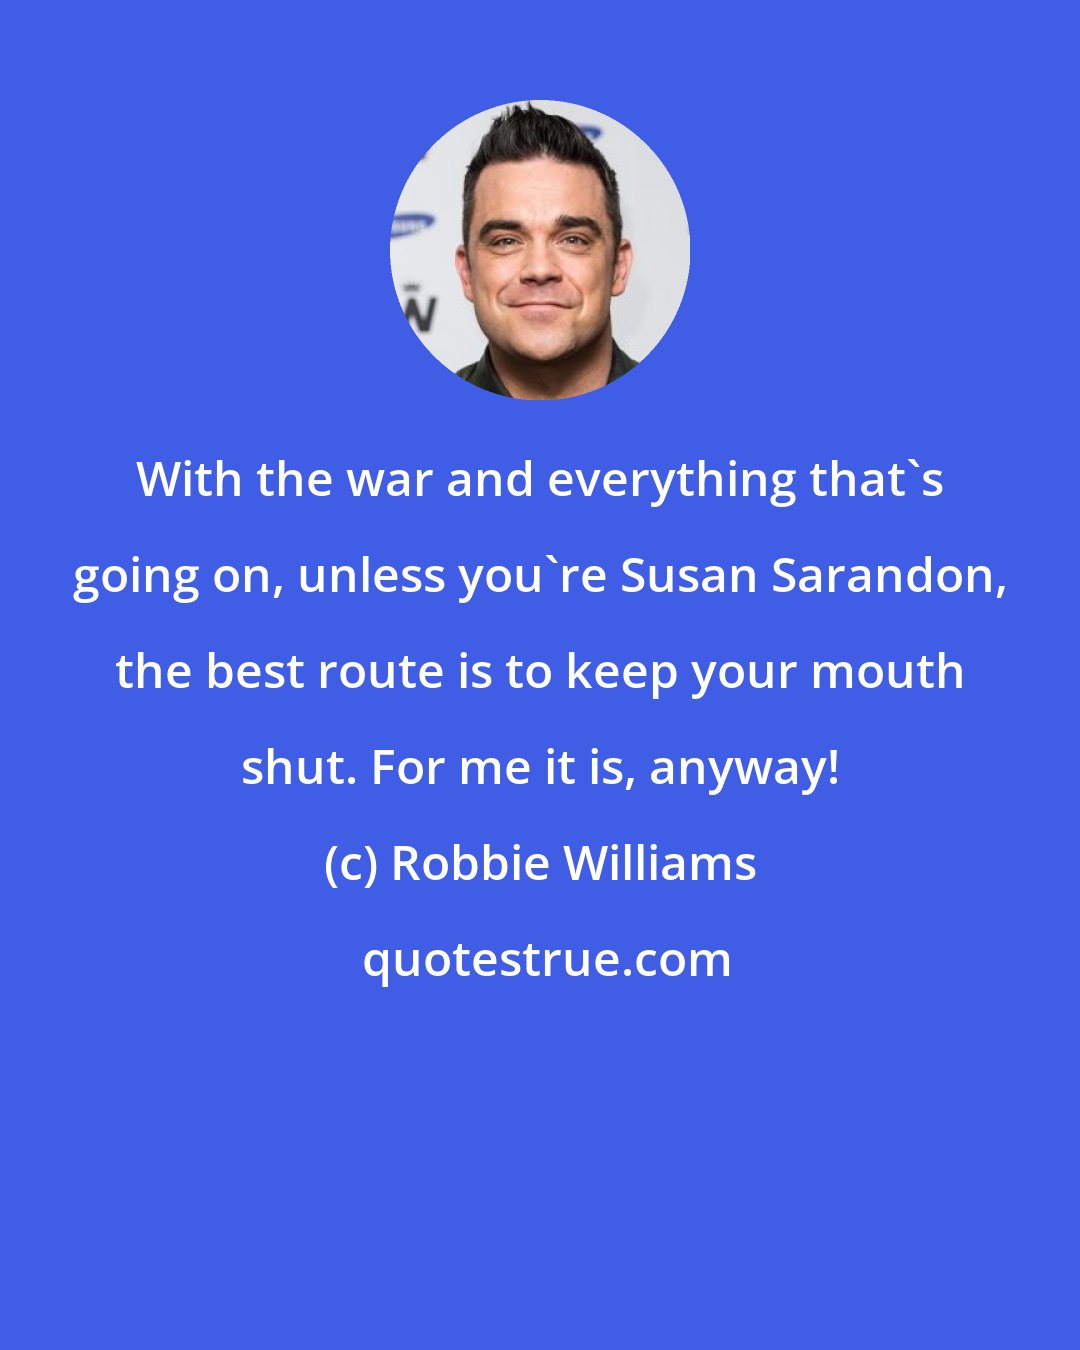 Robbie Williams: With the war and everything that's going on, unless you're Susan Sarandon, the best route is to keep your mouth shut. For me it is, anyway!